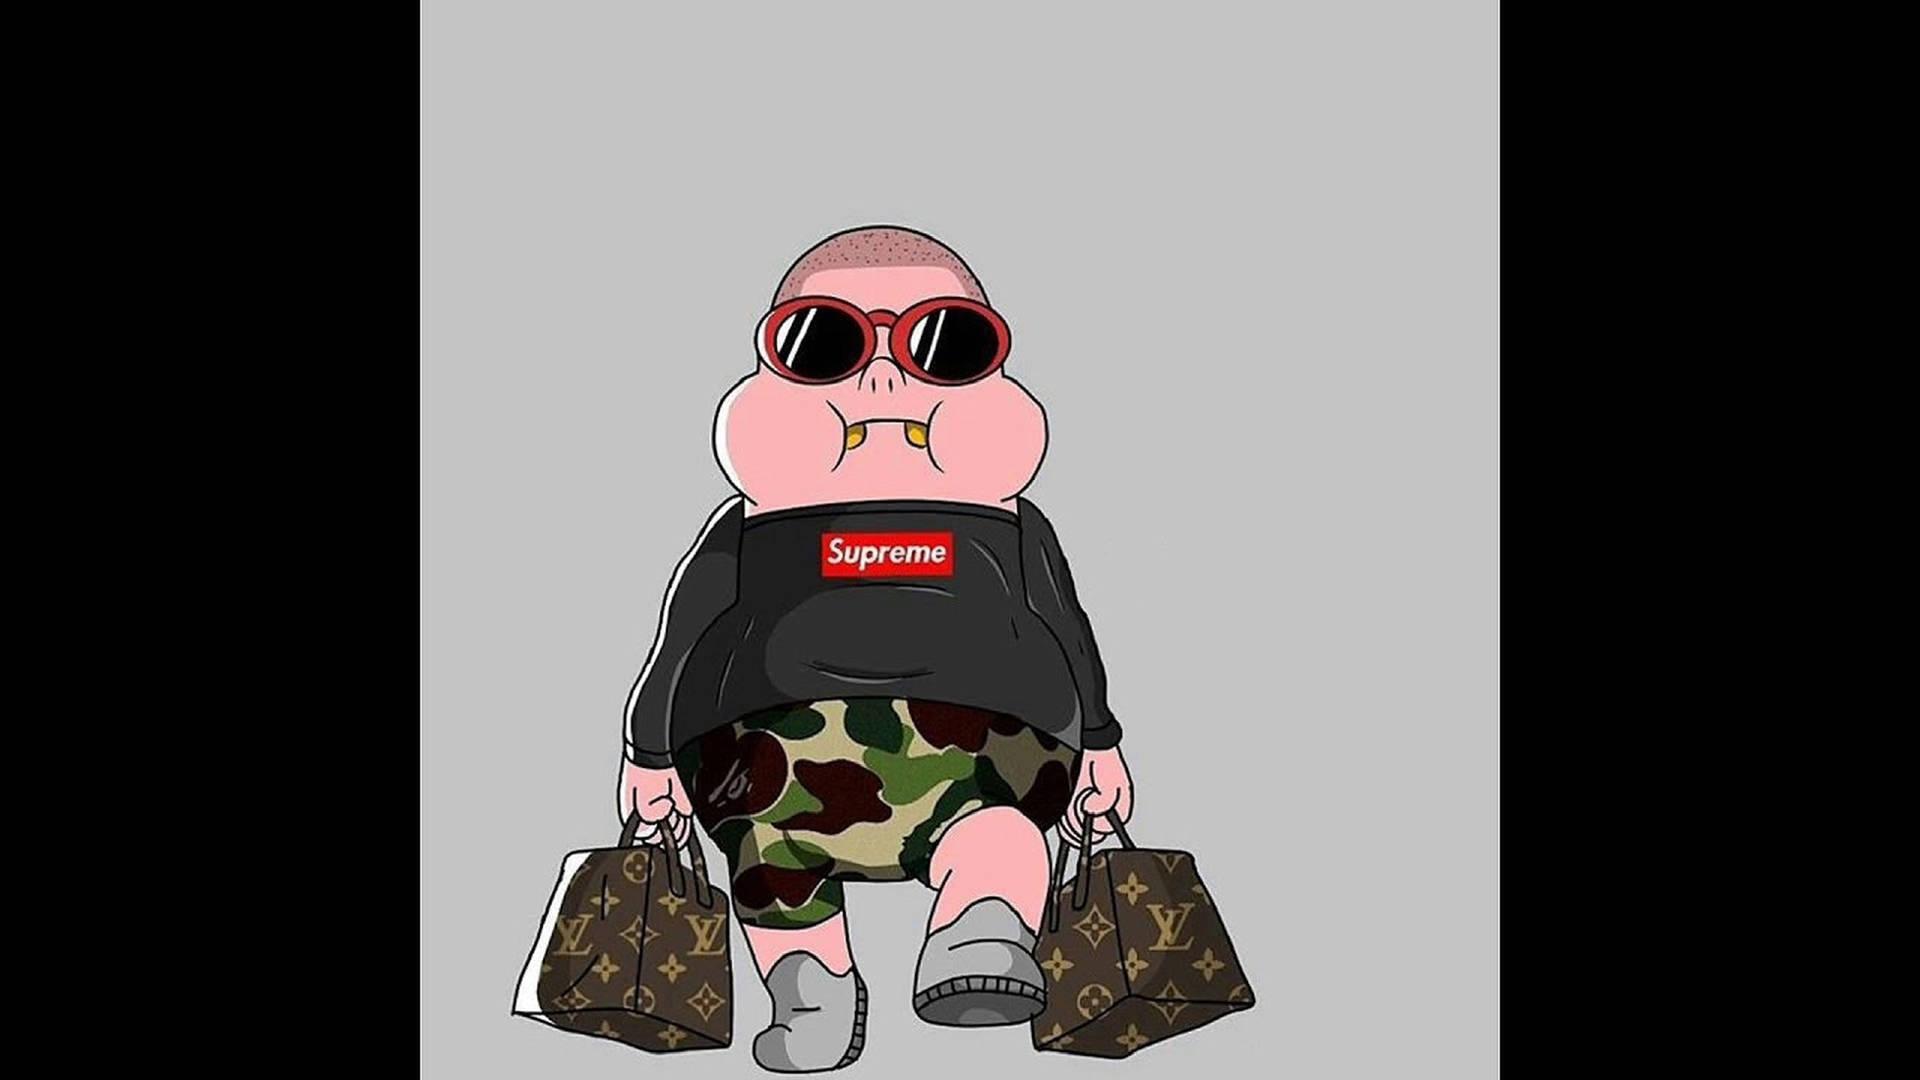 Cool Supreme Streetwear Themed Profile Picture